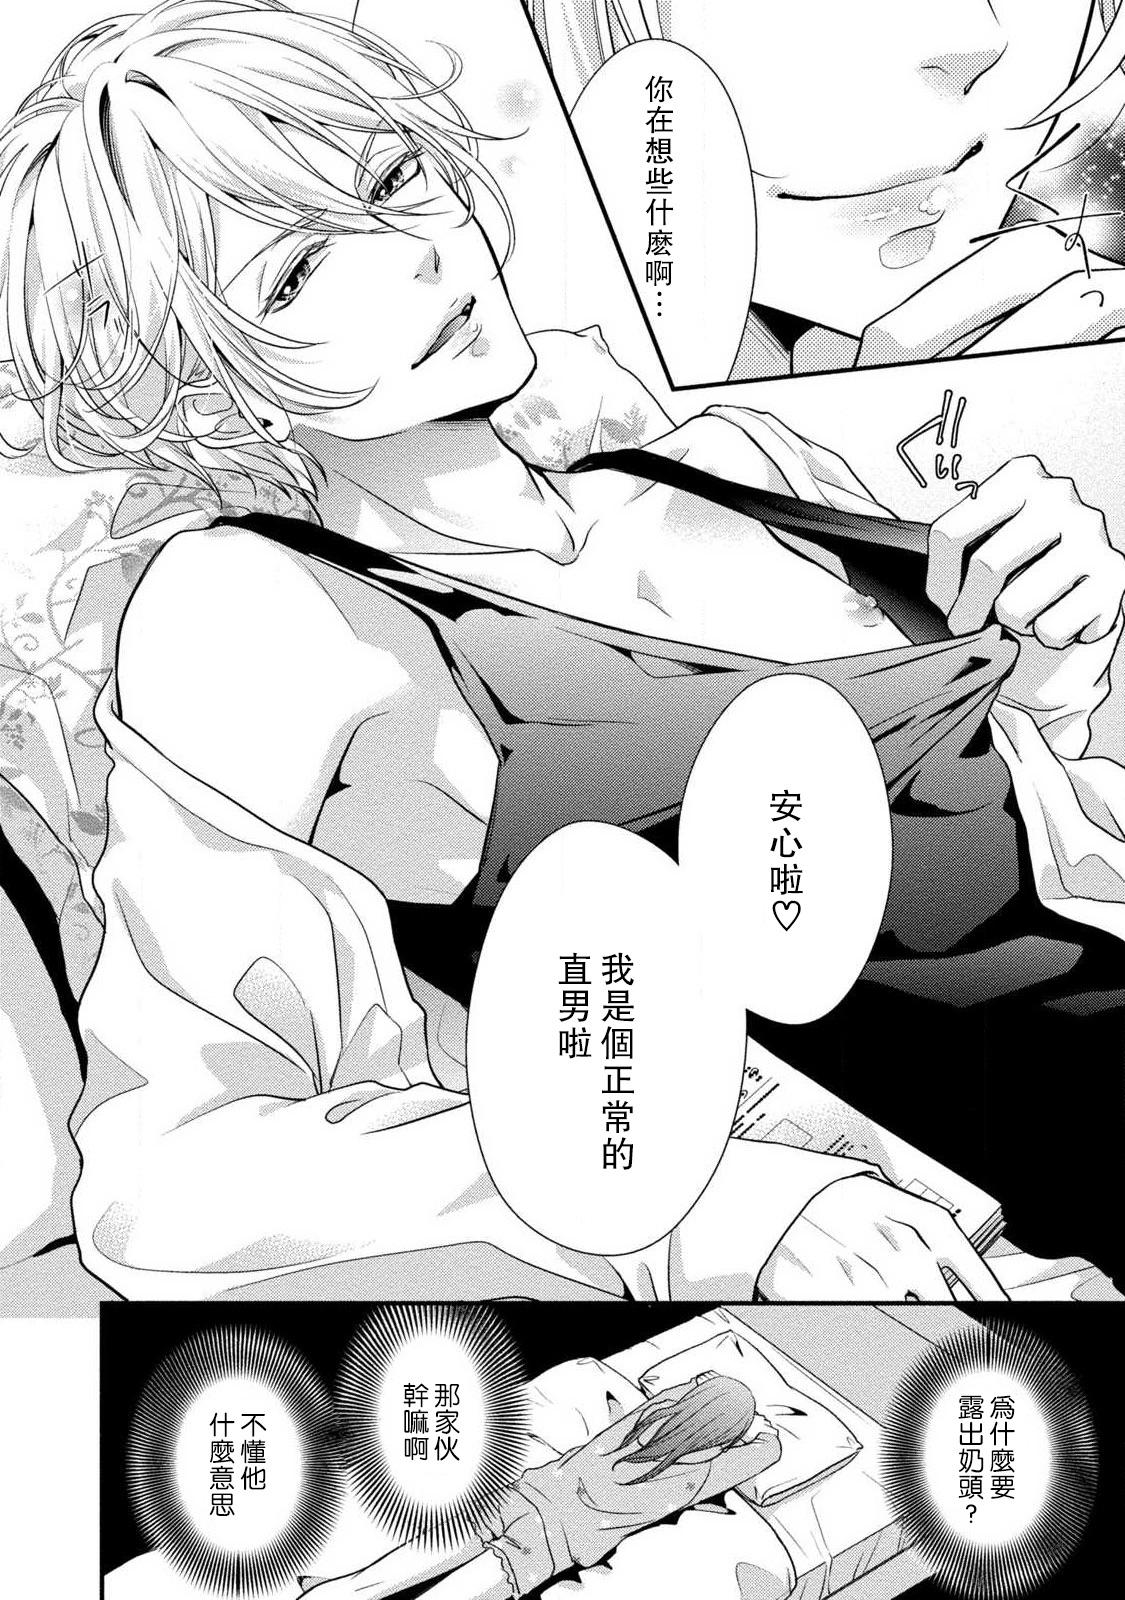 Sexy Girl Sex If my brother's friend was a male of exposure | 哥哥的朋友是露出系男子 Gay Baitbus - Page 10